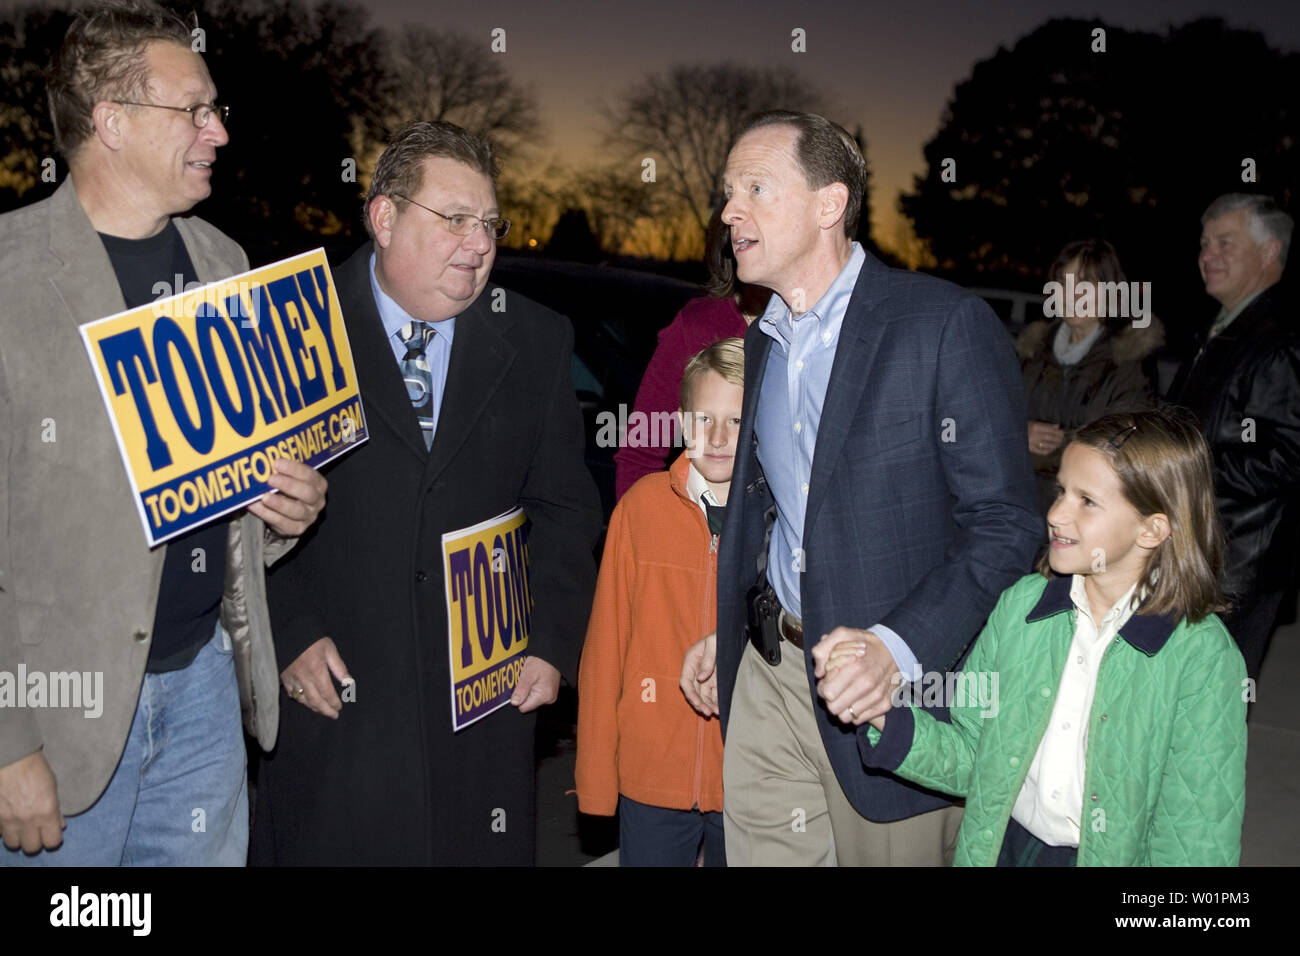 Pennsylvania U.S. Senate Republican candidate Pat Toomey is greeted by sign carrying supporters as he arrives to vote in rural Pennsylvania at the crack of dawn November 2, 2010. He is accompanied by his two children Patrick, age 9 and Bridget, age 10.          UPI/John Anderson Stock Photo